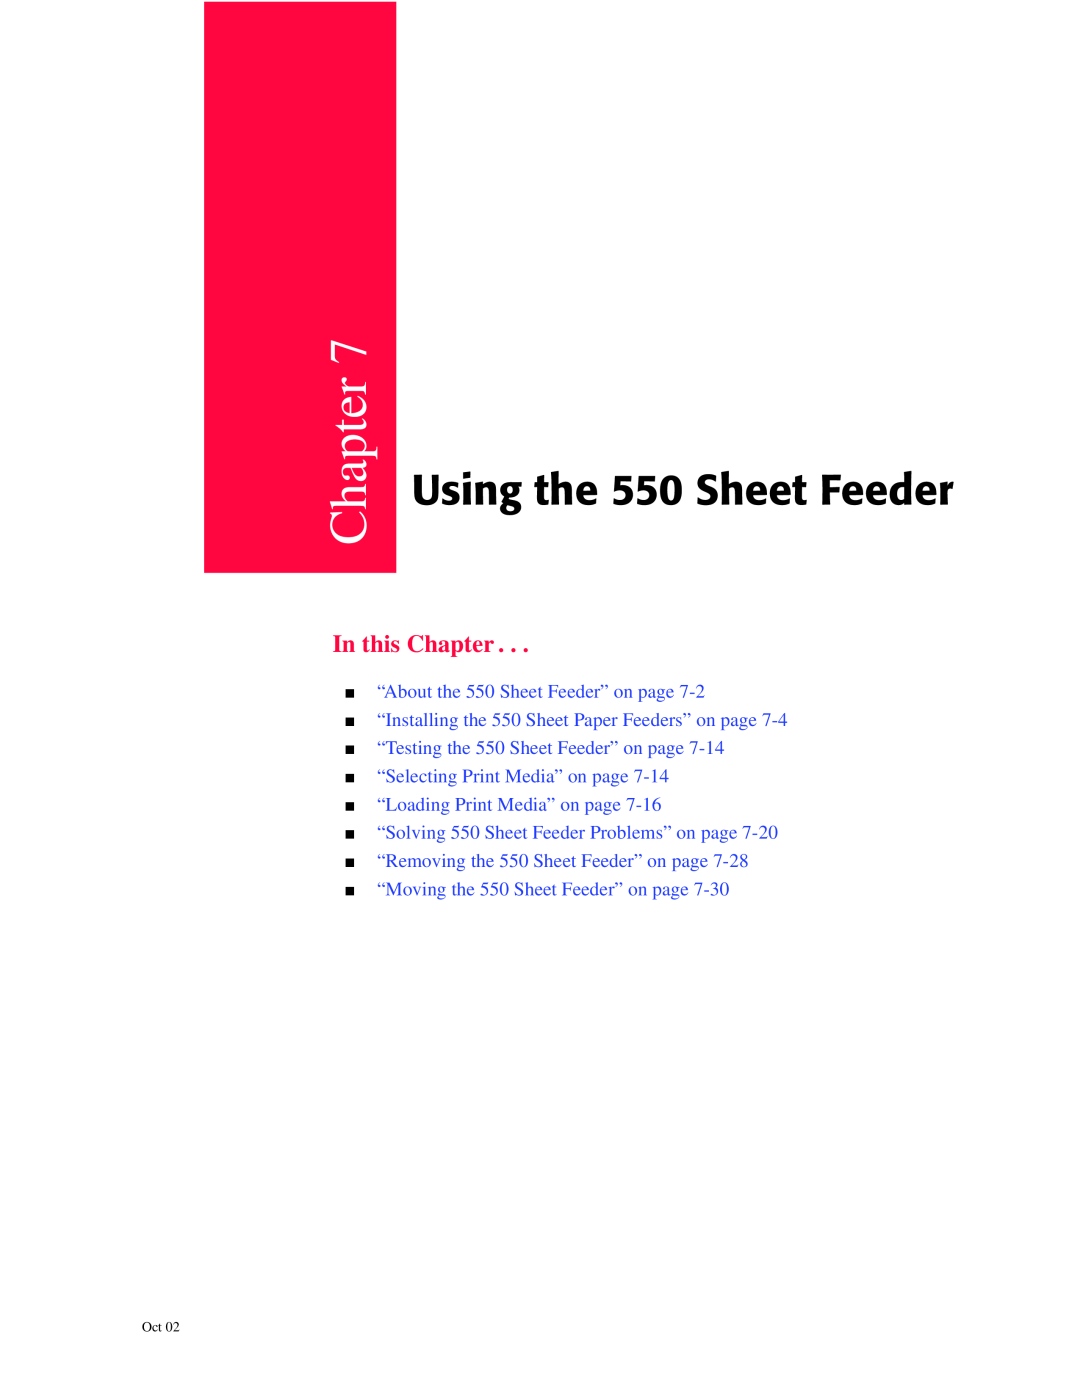 Oki 6100 manual Using the 550 Sheet Feeder, In this Chapter, “About the 550 Sheet Feeder” on page 